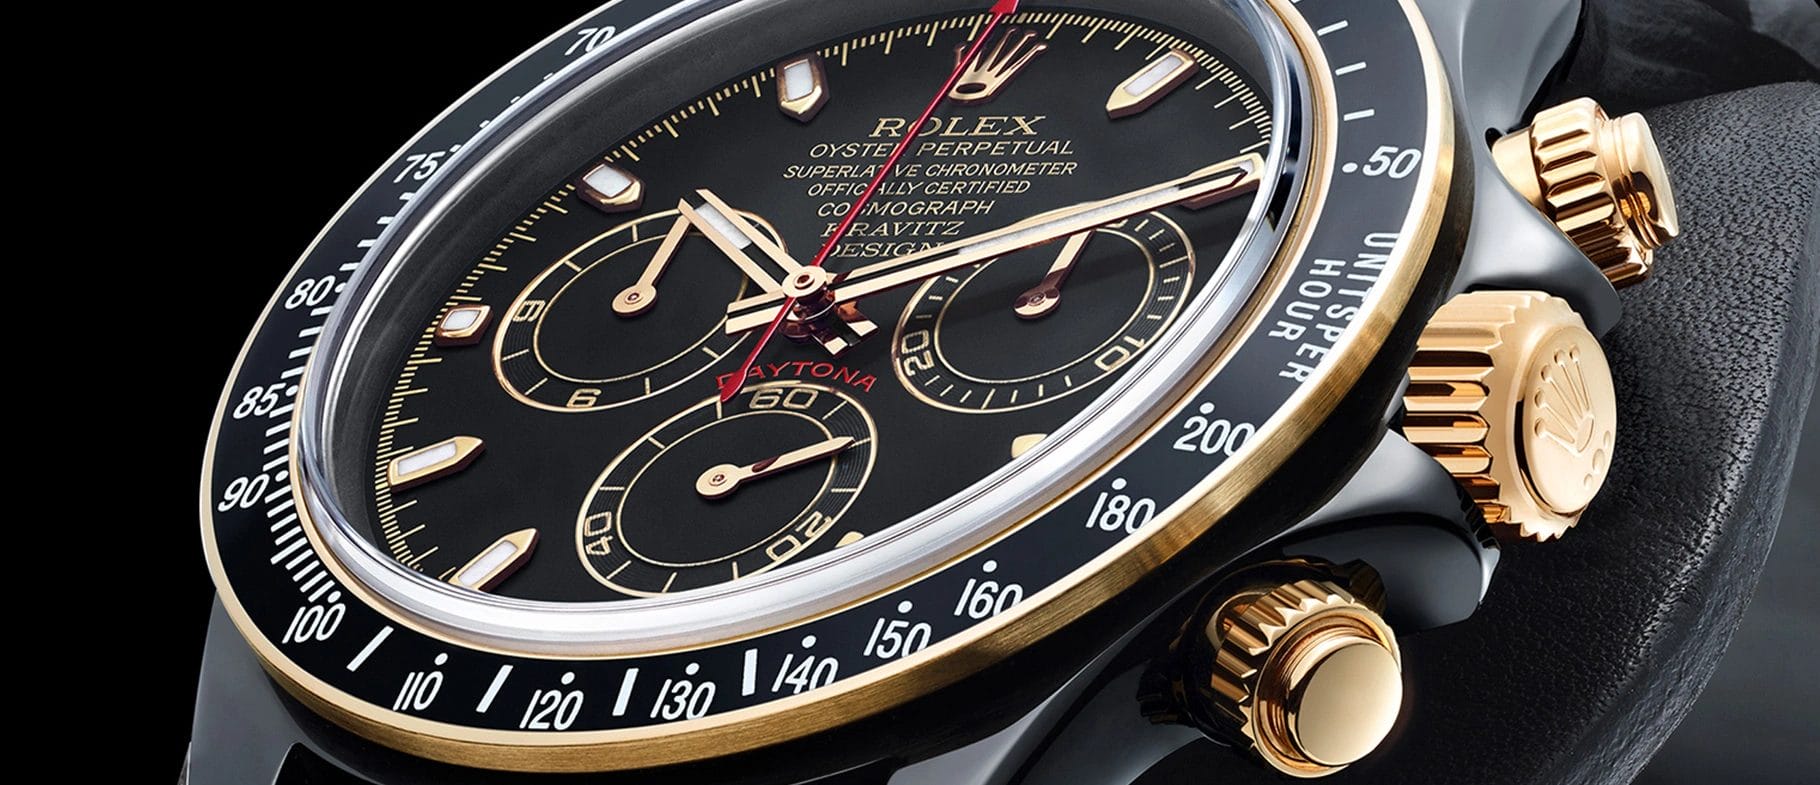 5 Essential Tips for Buying Replica Watches Online